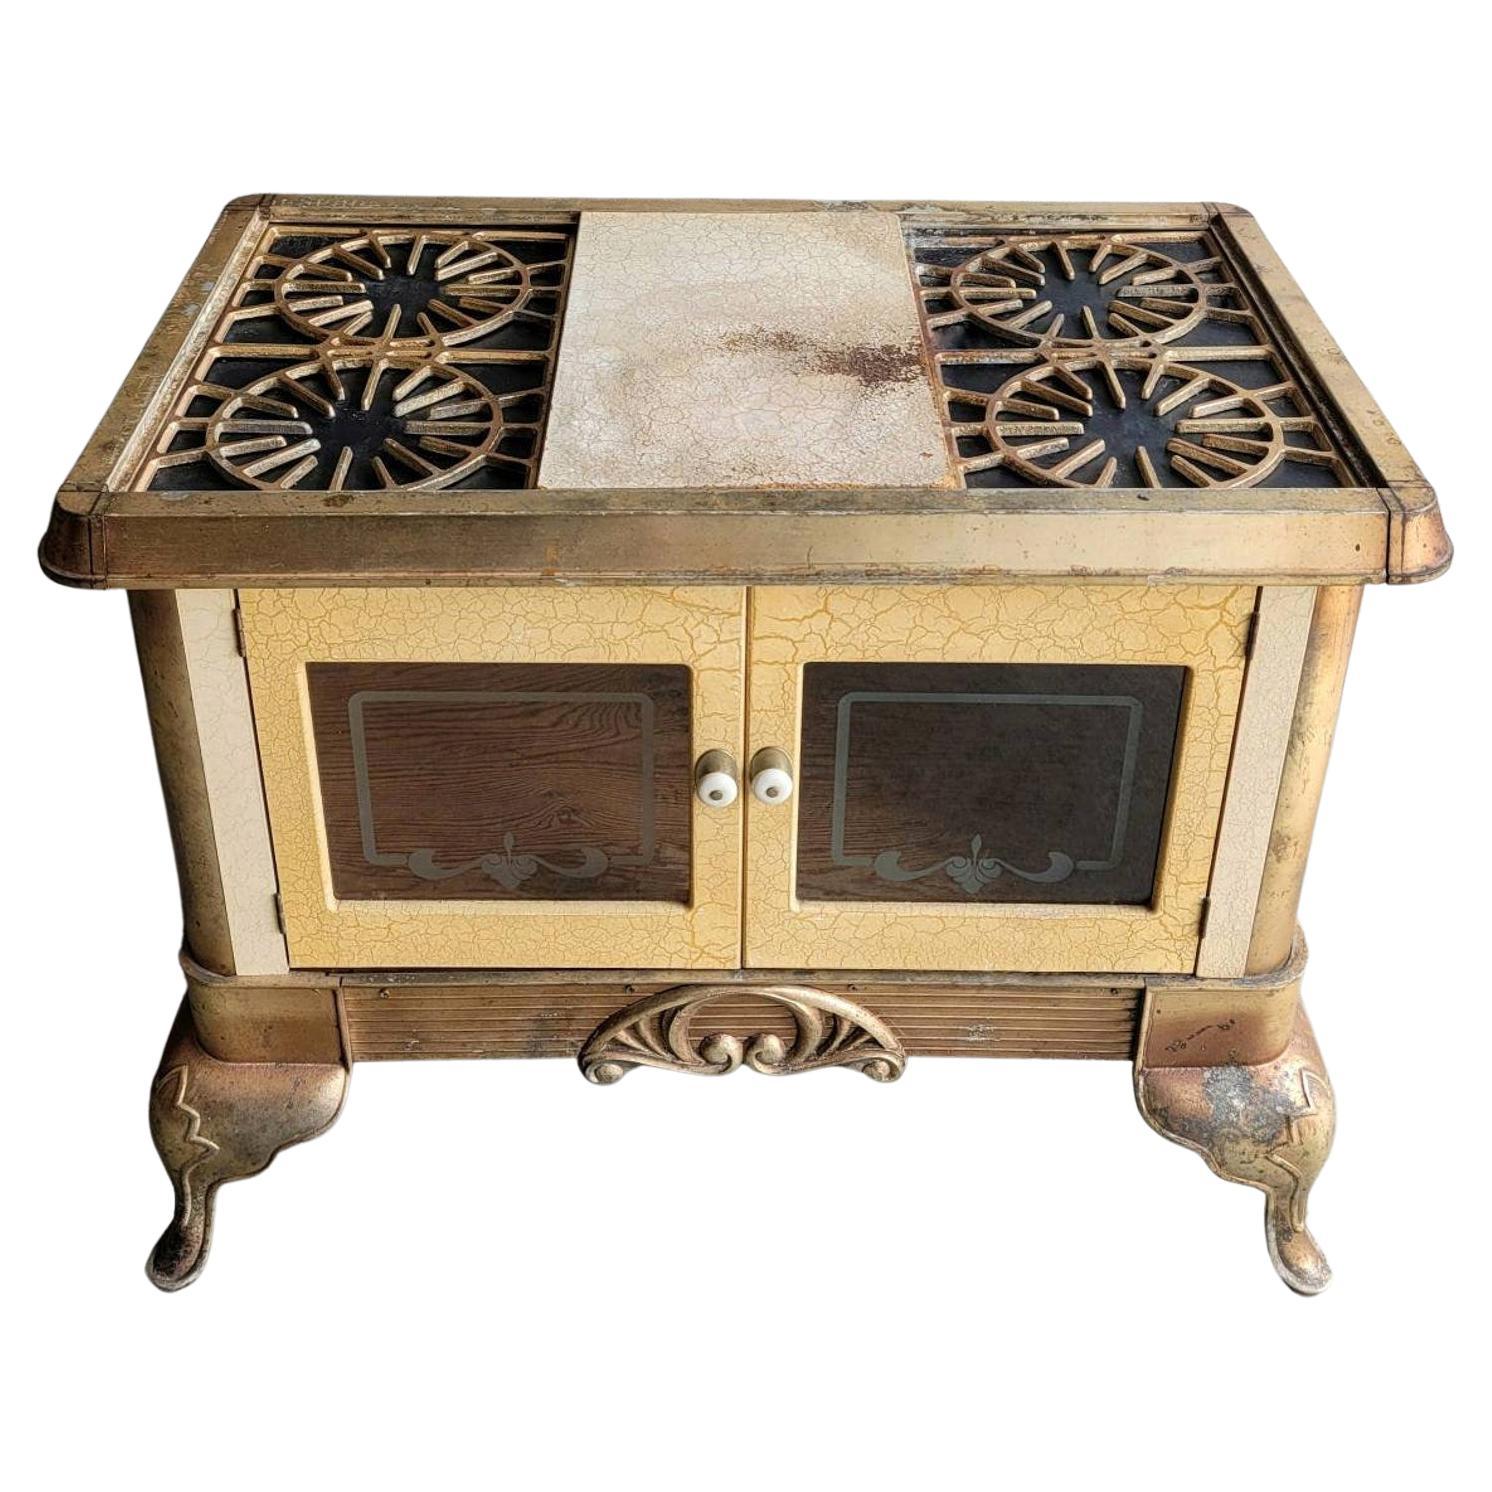 Antique American Early Kitchen Stove Now Console Table For Sale